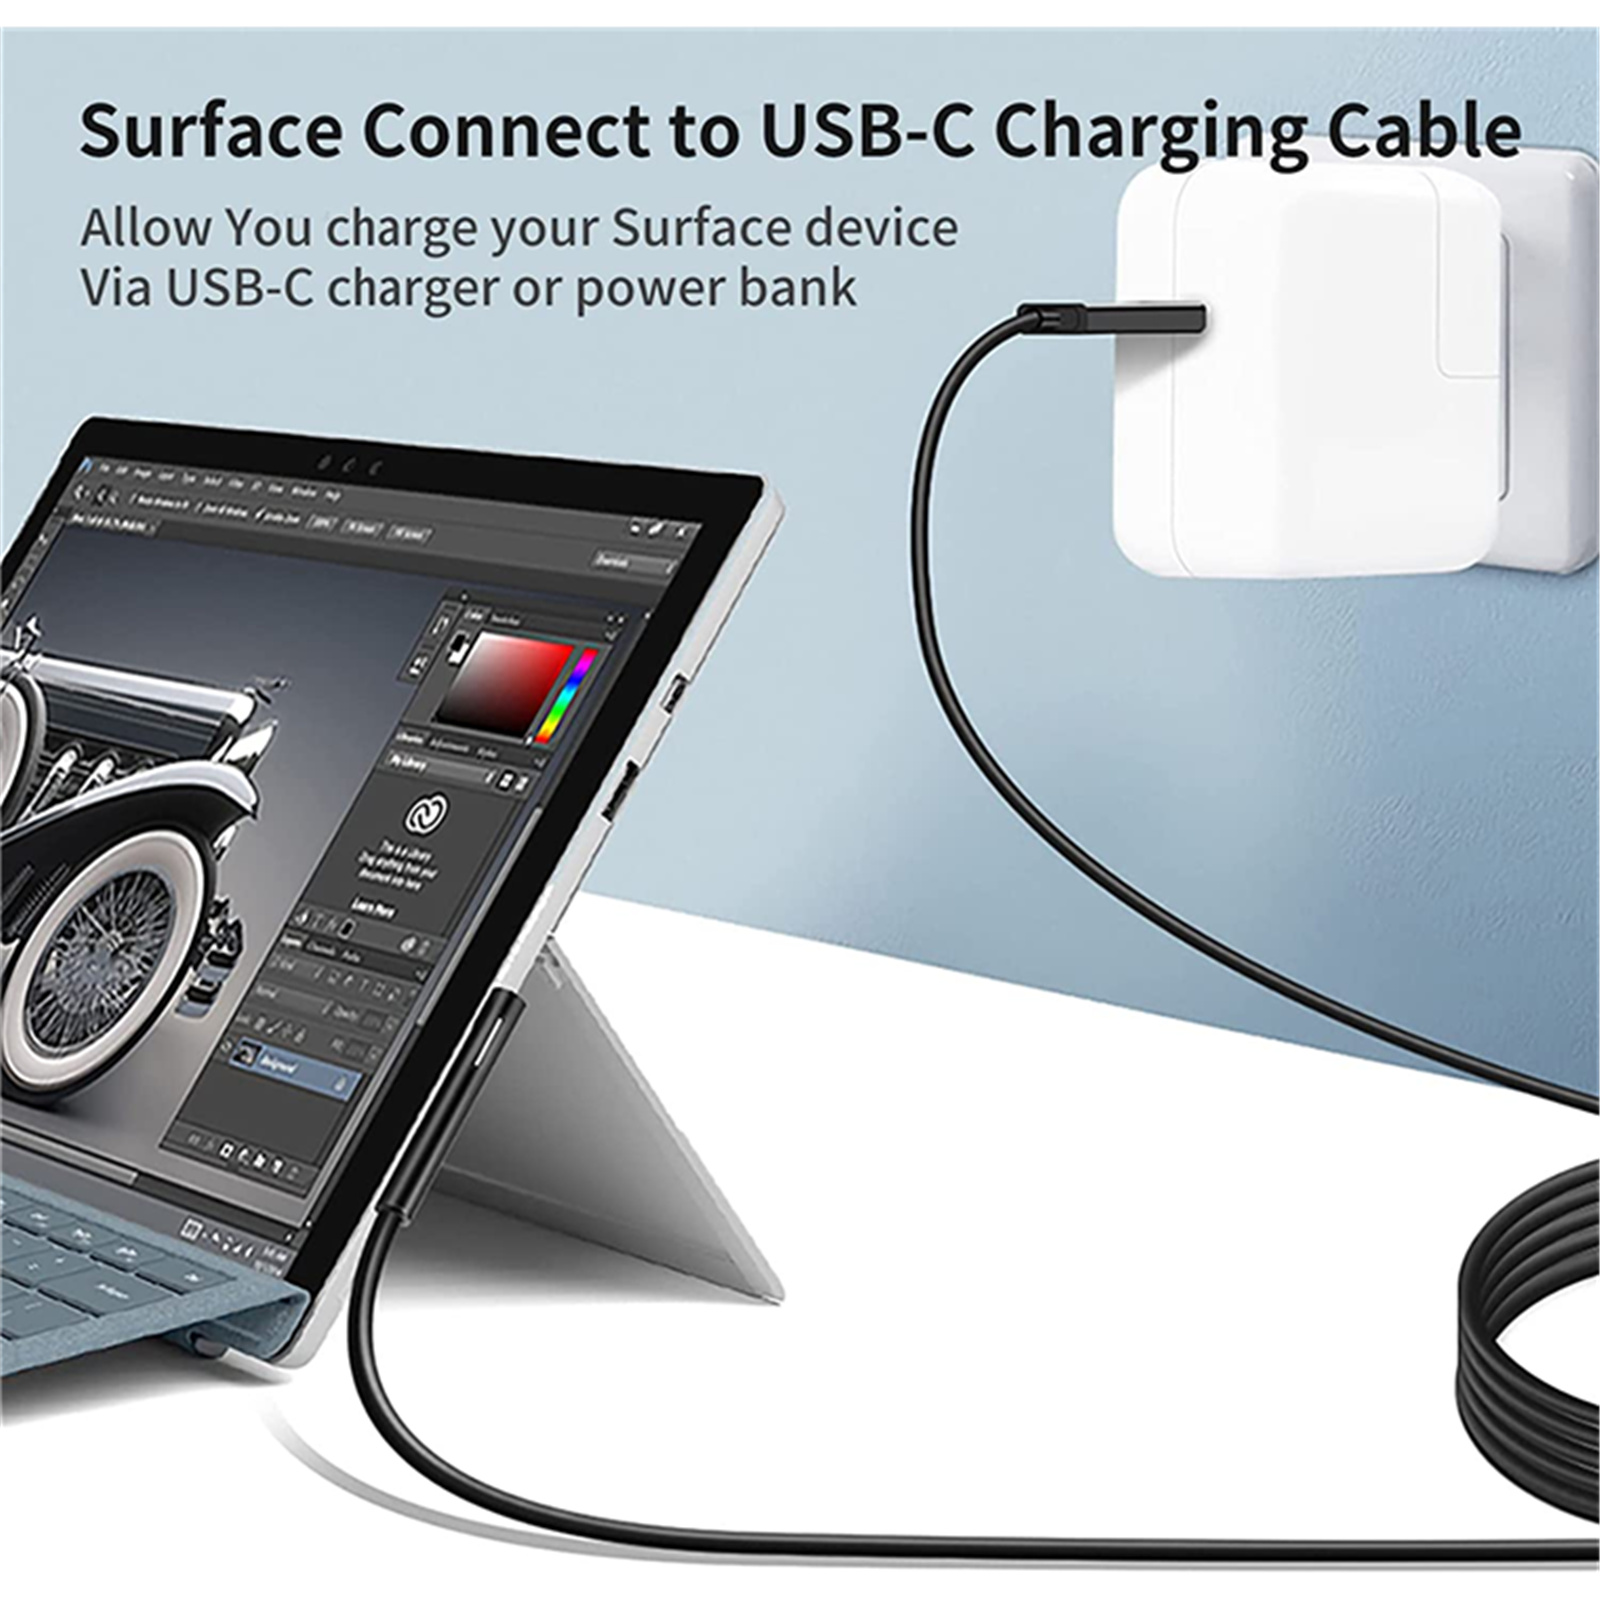 Buy the Microsoft 1.8M Surface Connect to USB-C Charging Cable - Black,...  ( CABOEM0067 ) online - PBTech.com